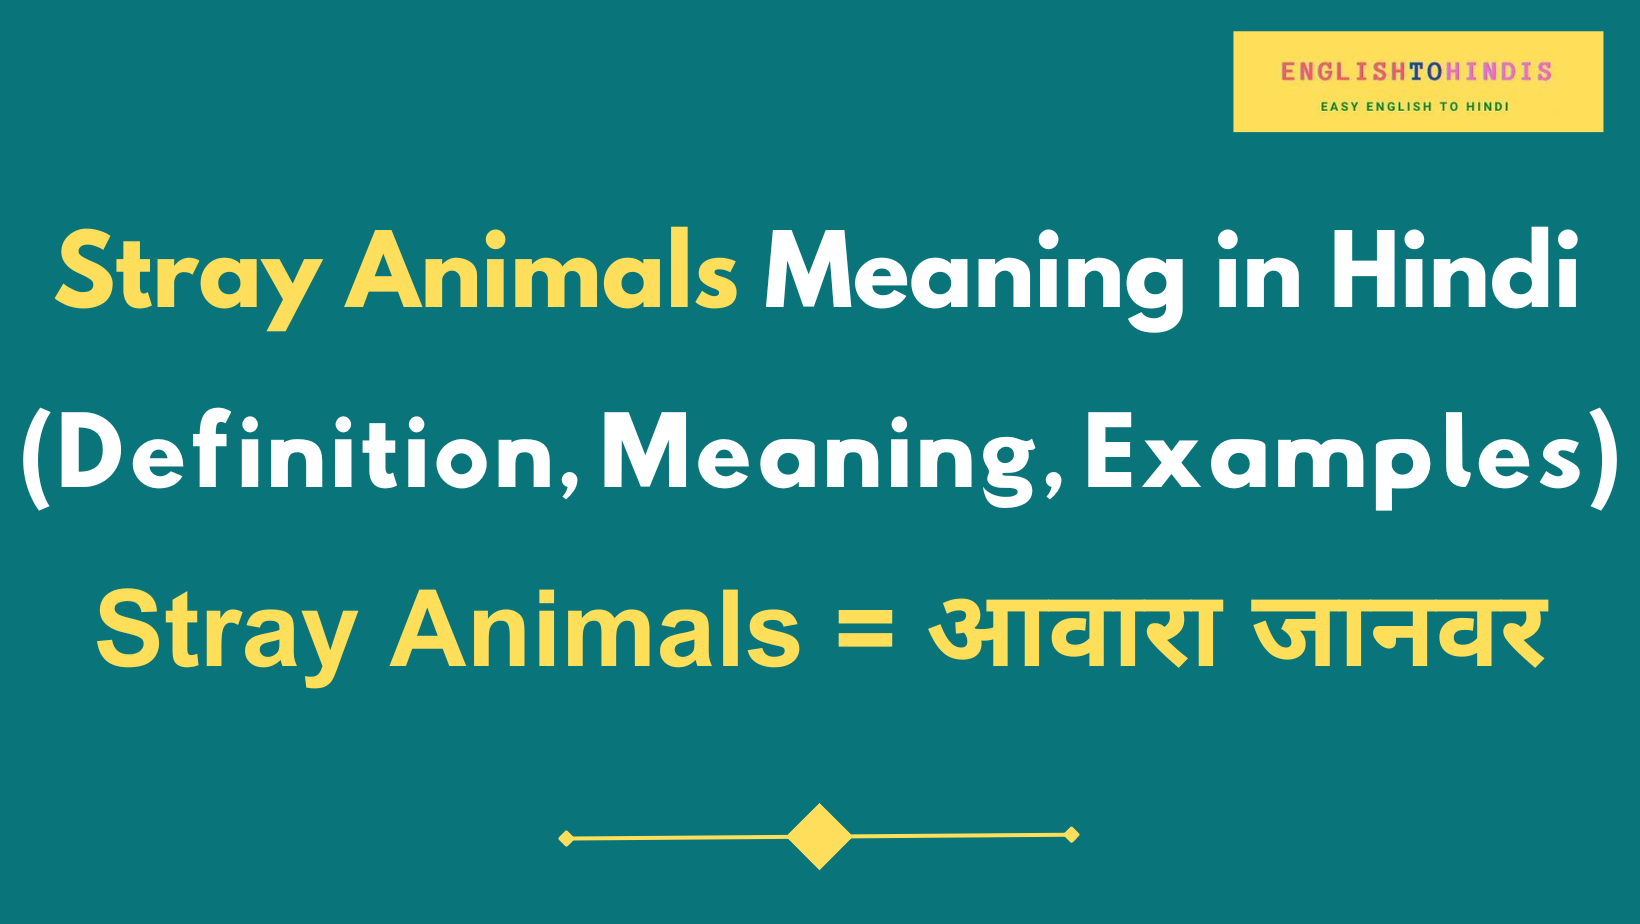 Stray Animals Meaning in Hindi